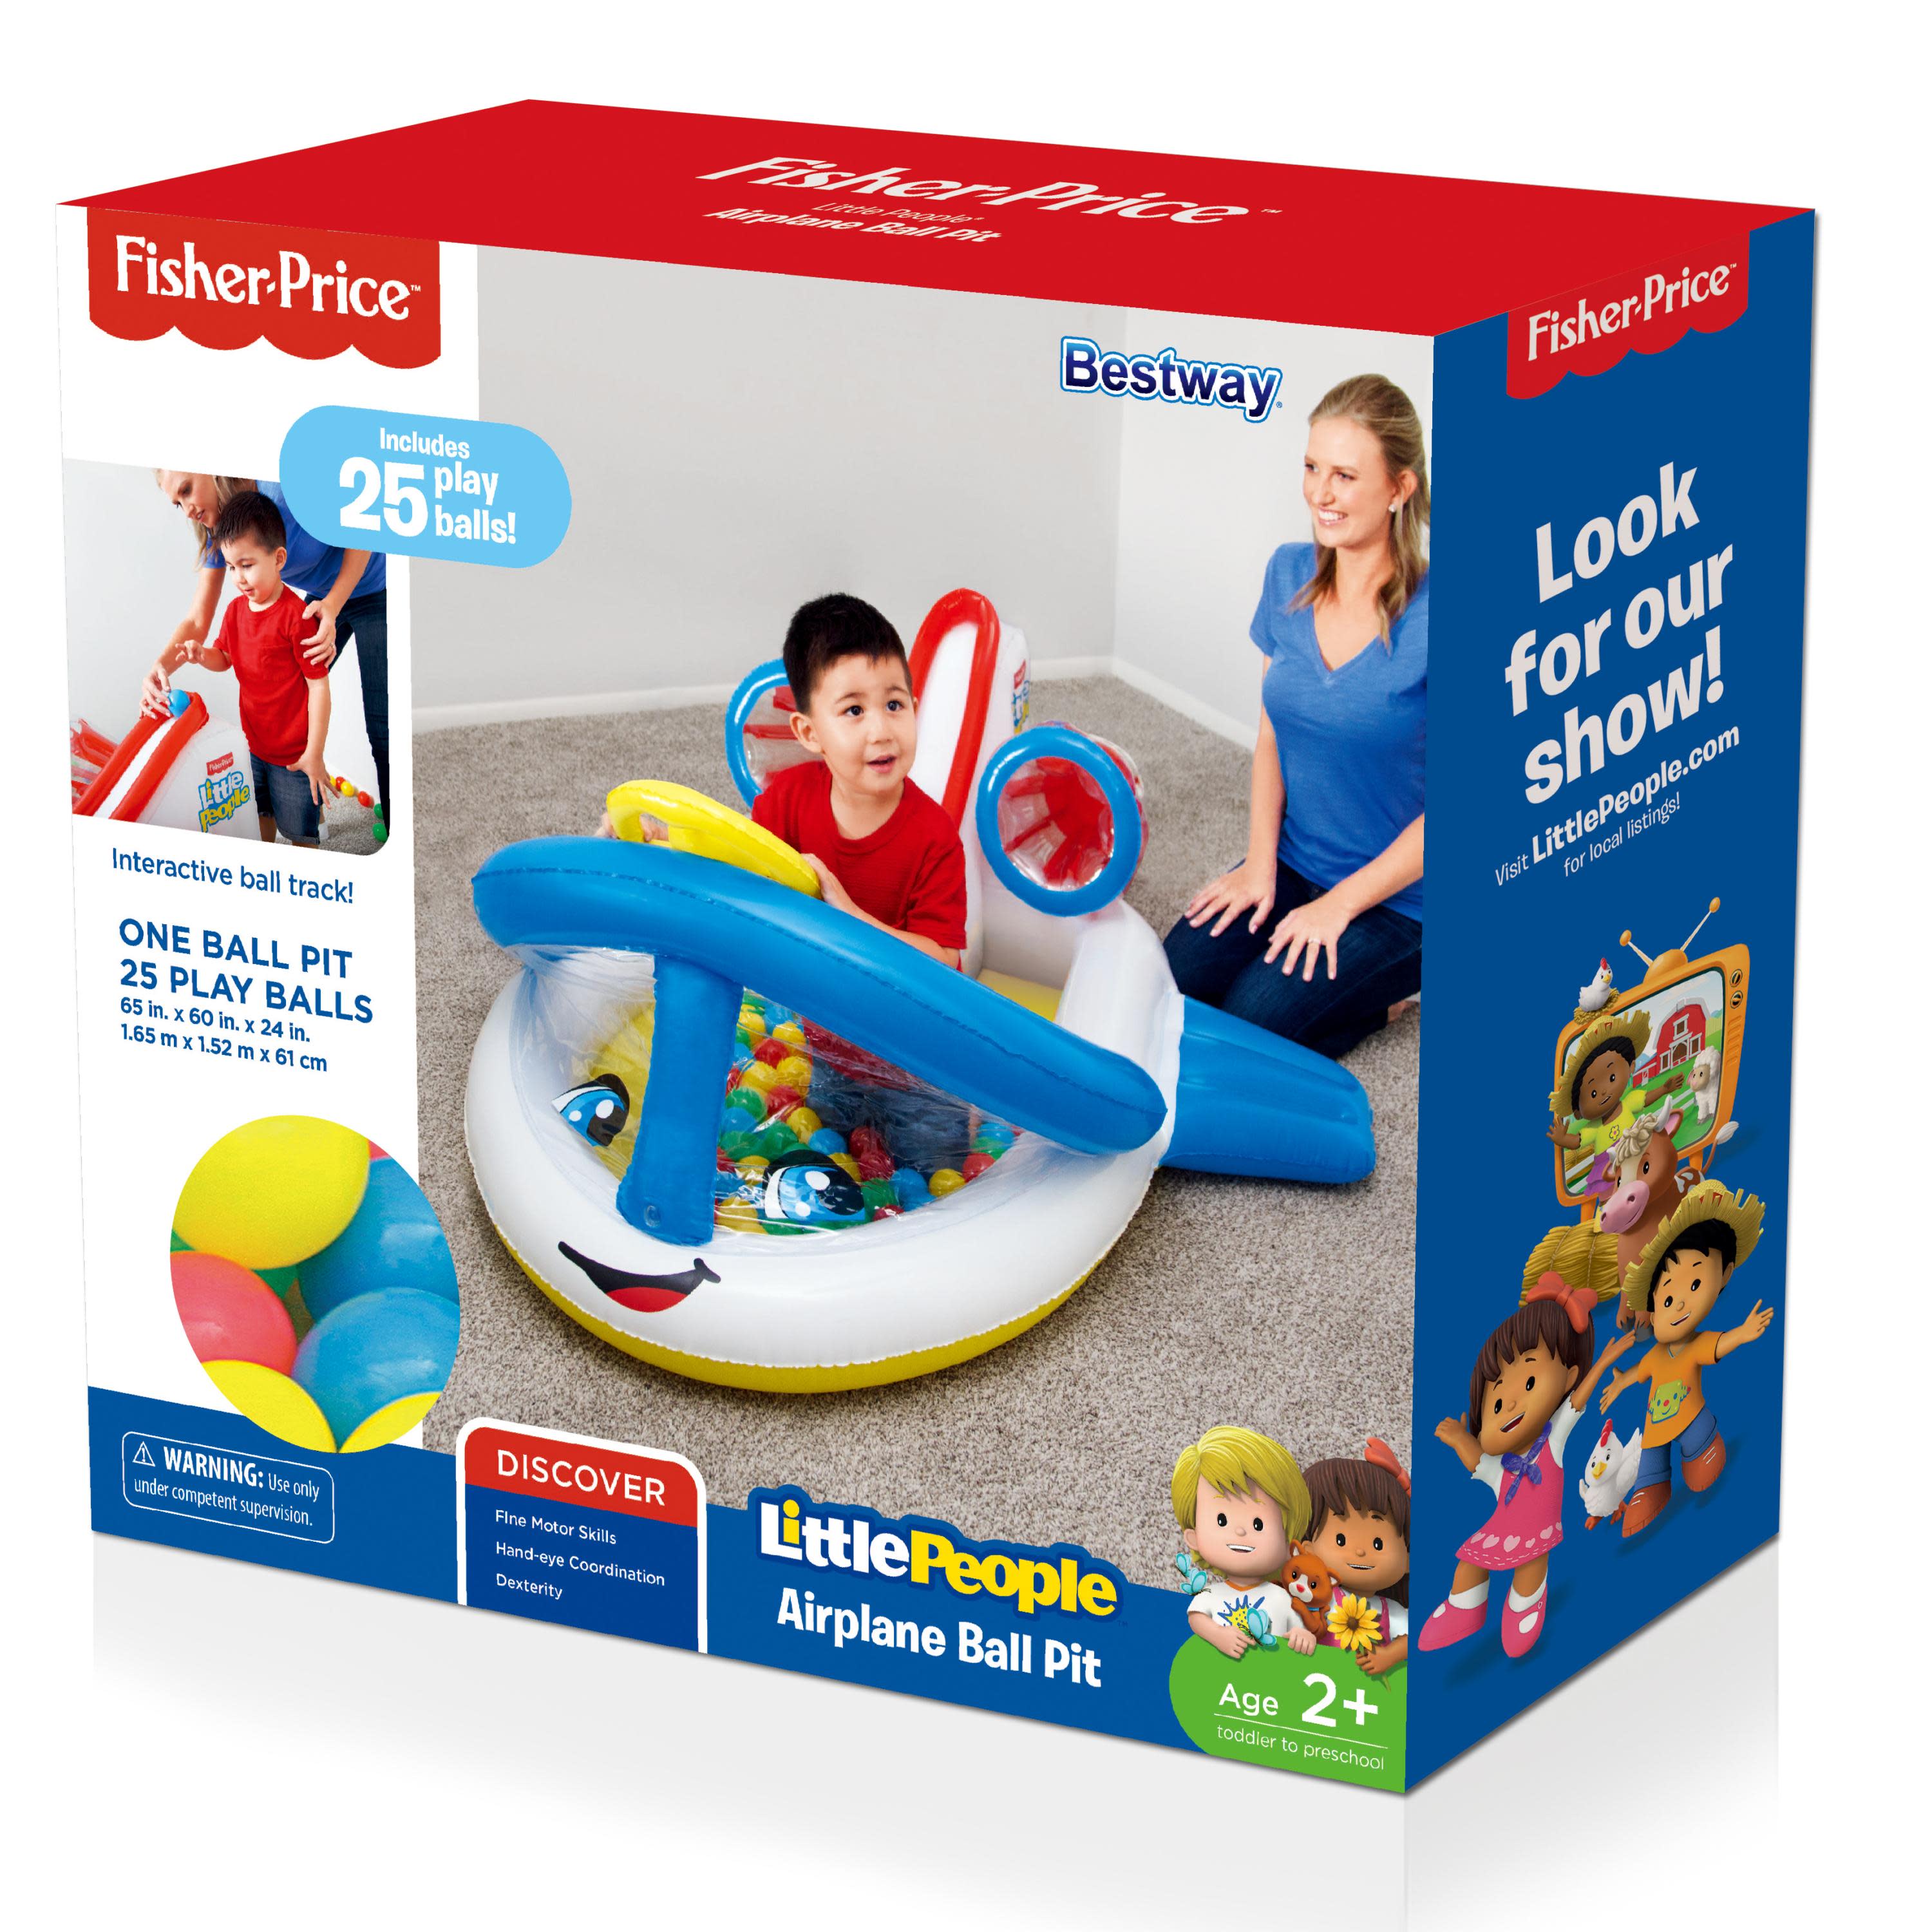 Fisher-Price Little People Airplane Ball Pit Set for Kids Ages 2+ - image 3 of 8